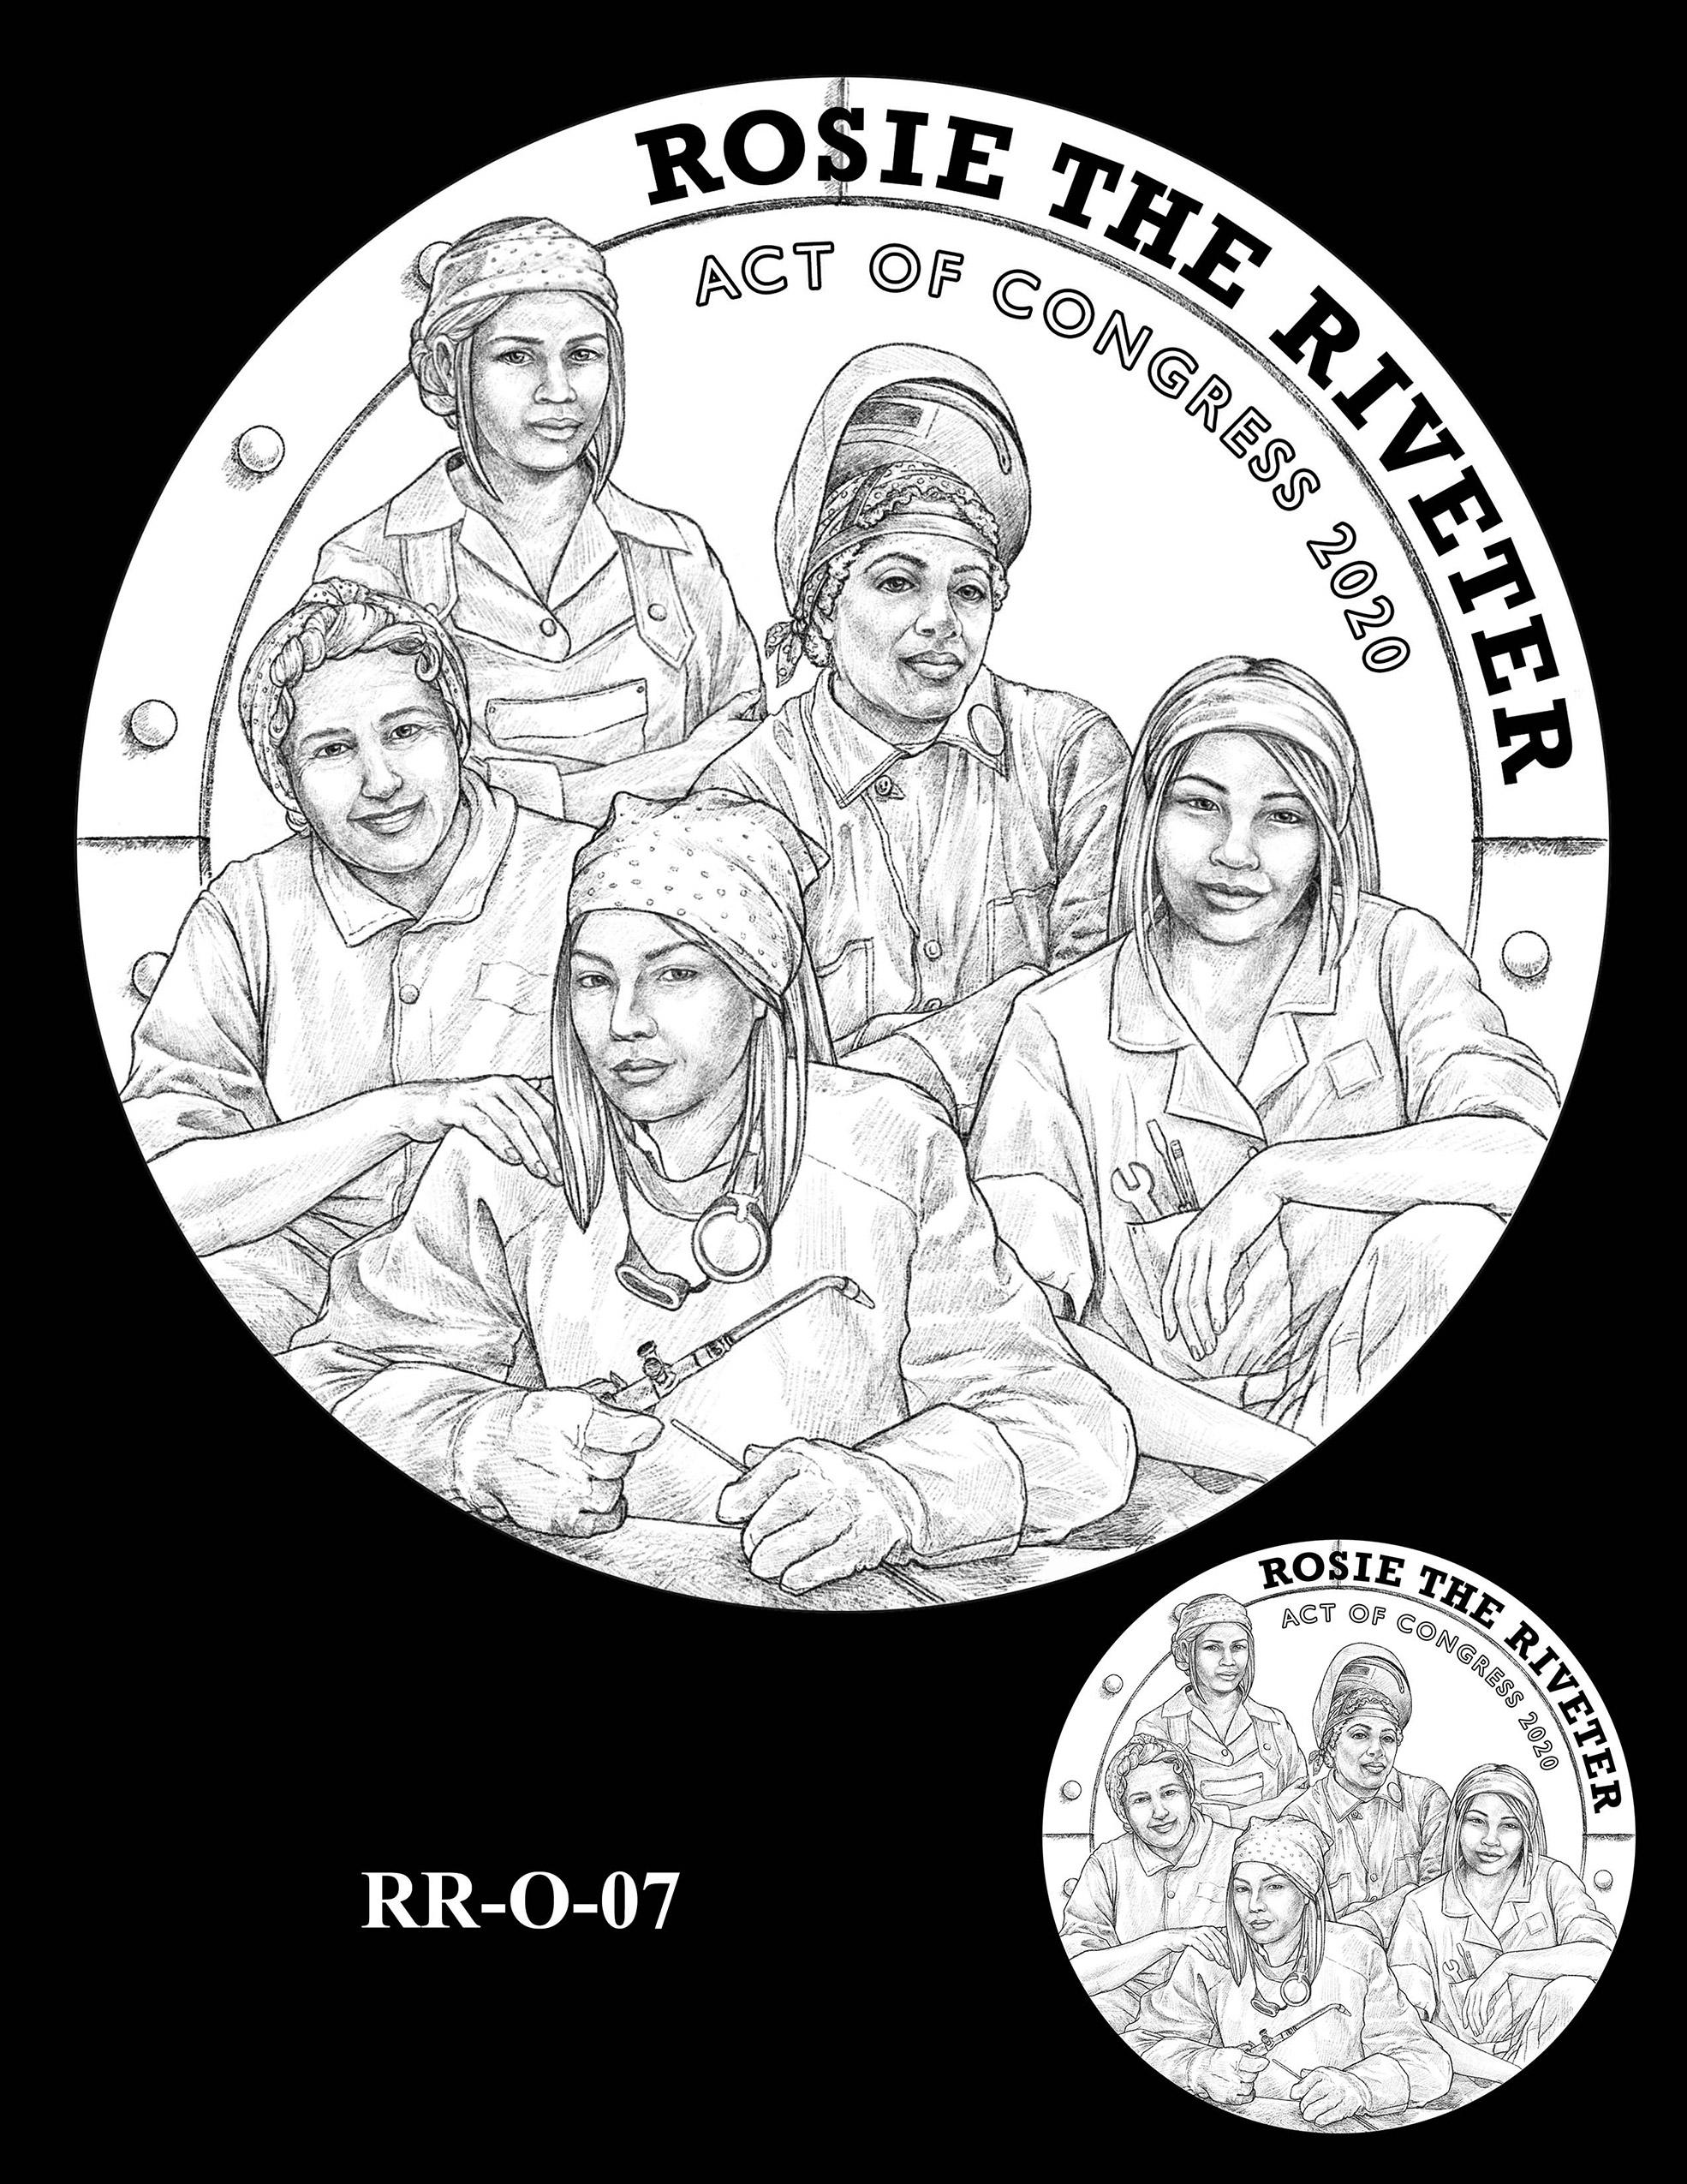 RR-O-07 -- Rosie the Riveter Congressional Gold Medal